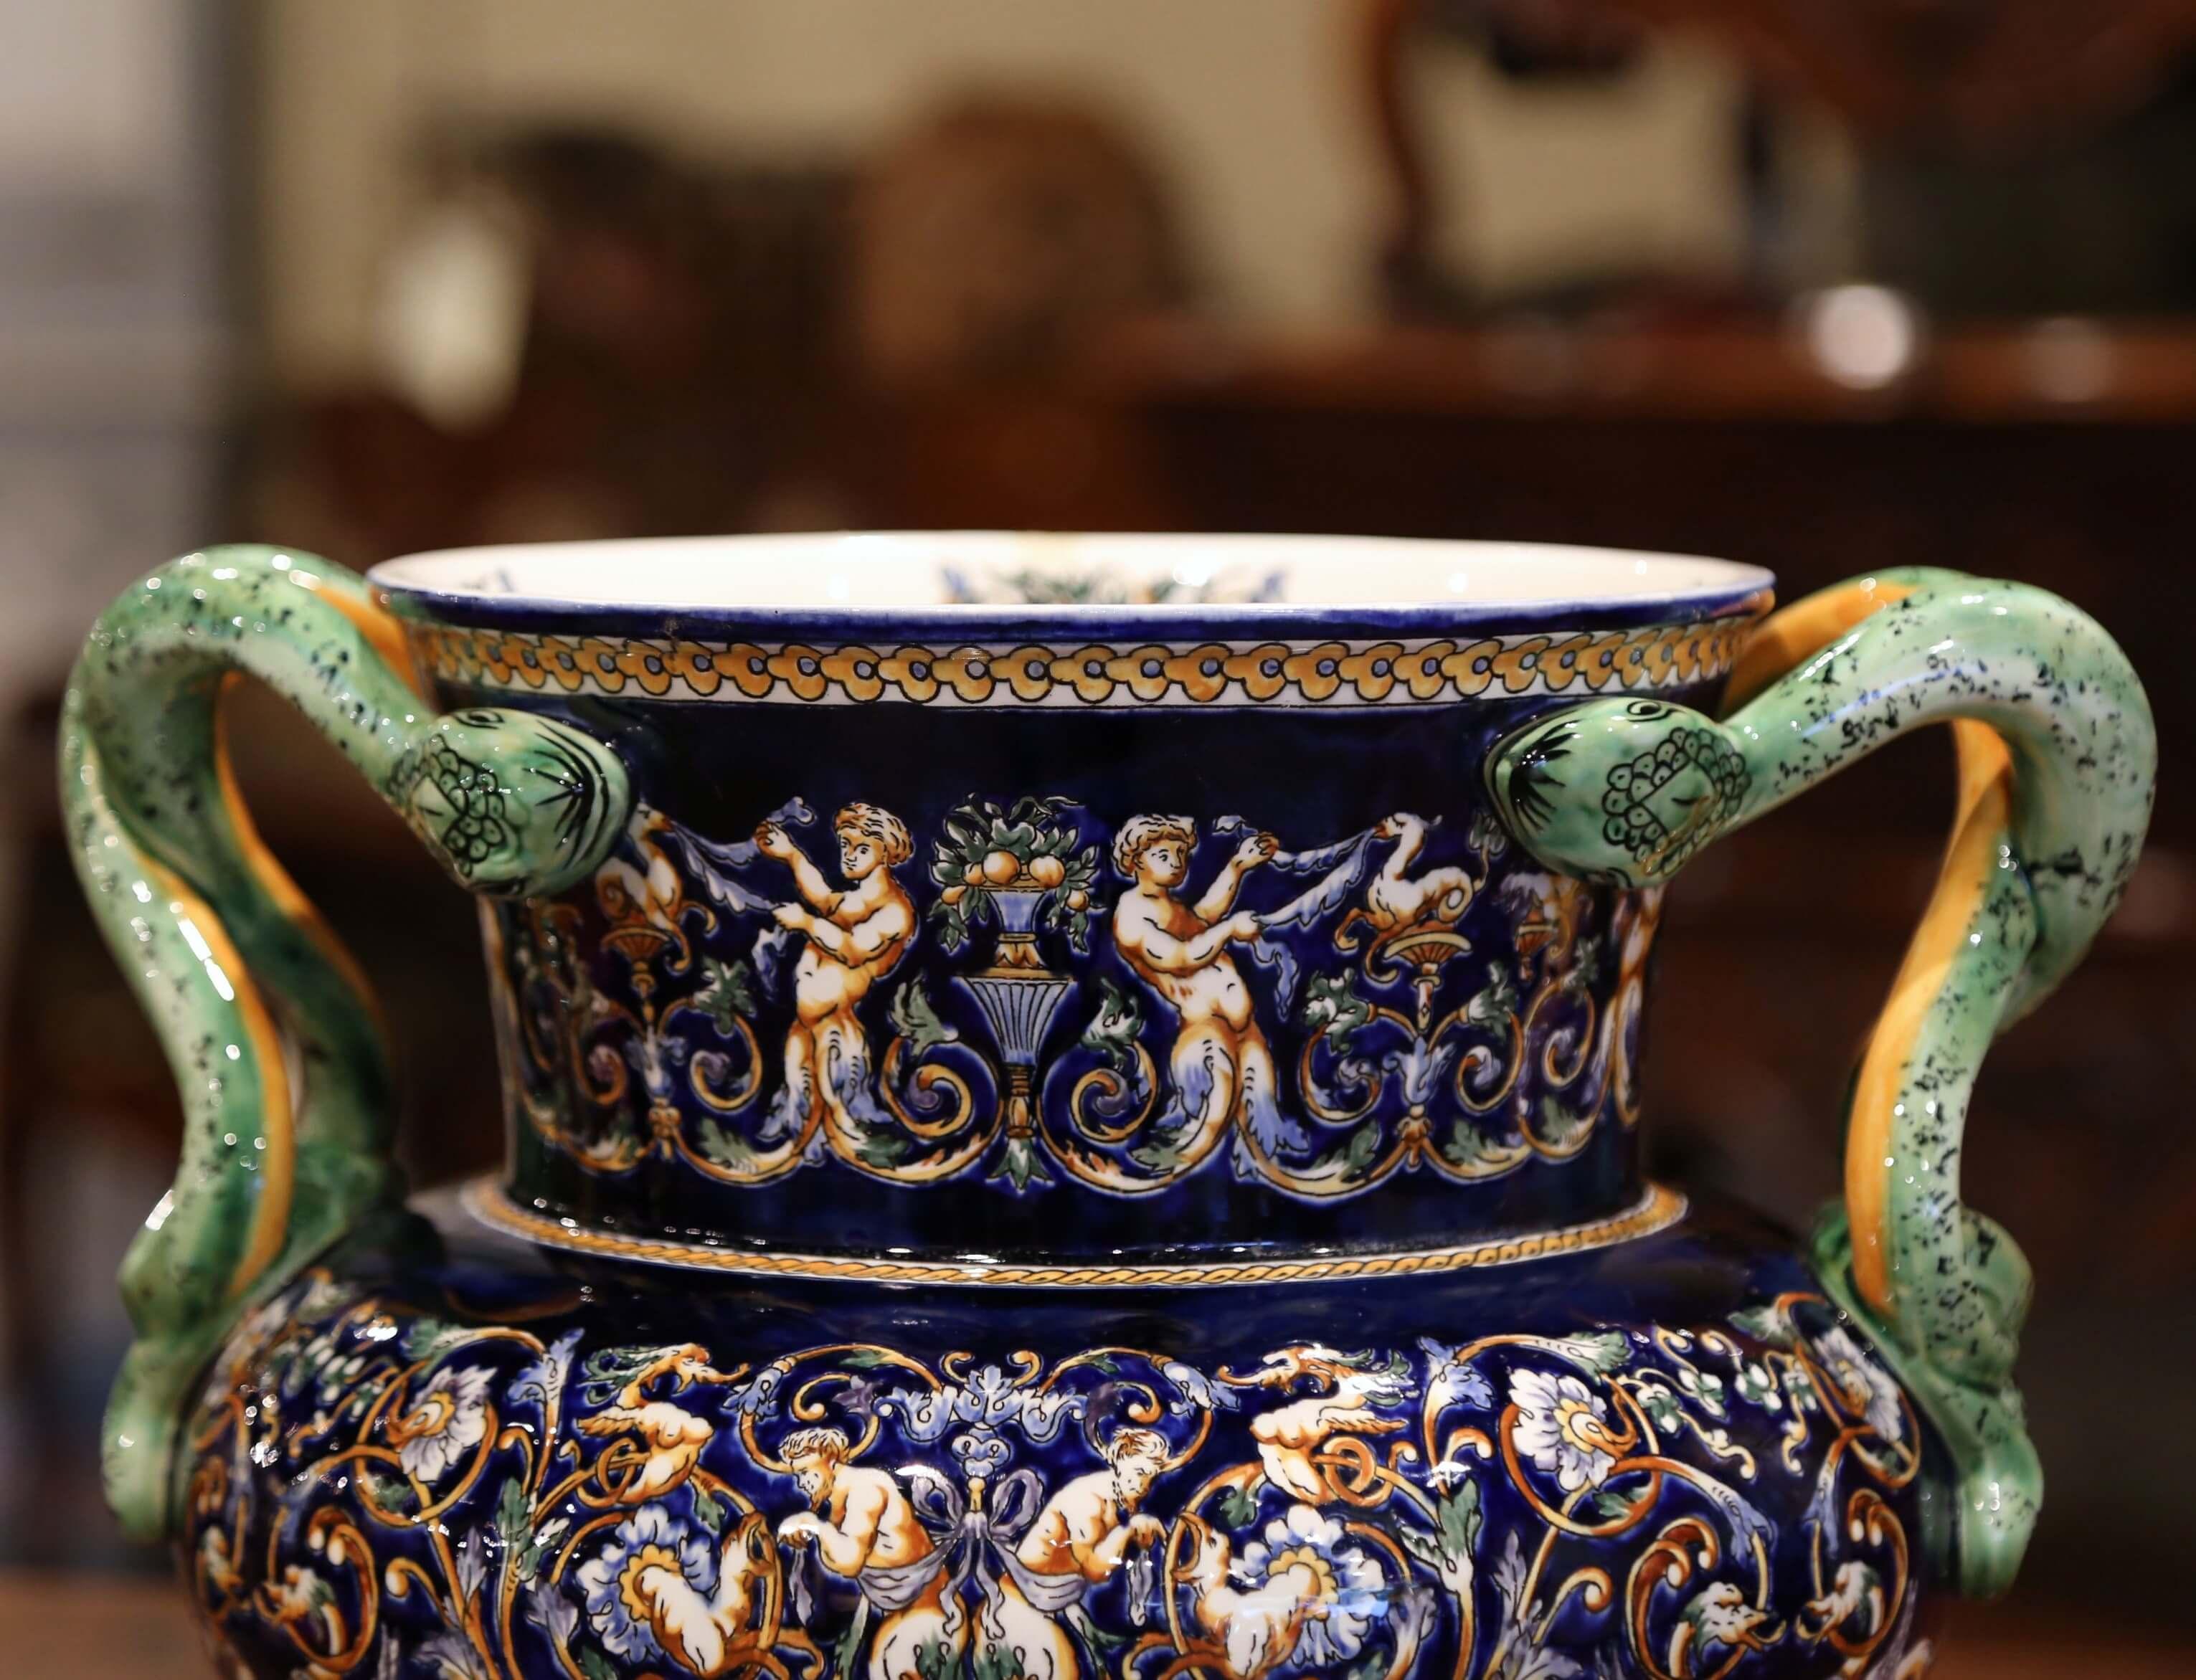 19th Century French Painted Porcelain Cache Pot with Snake Handles from Gien In Excellent Condition For Sale In Dallas, TX